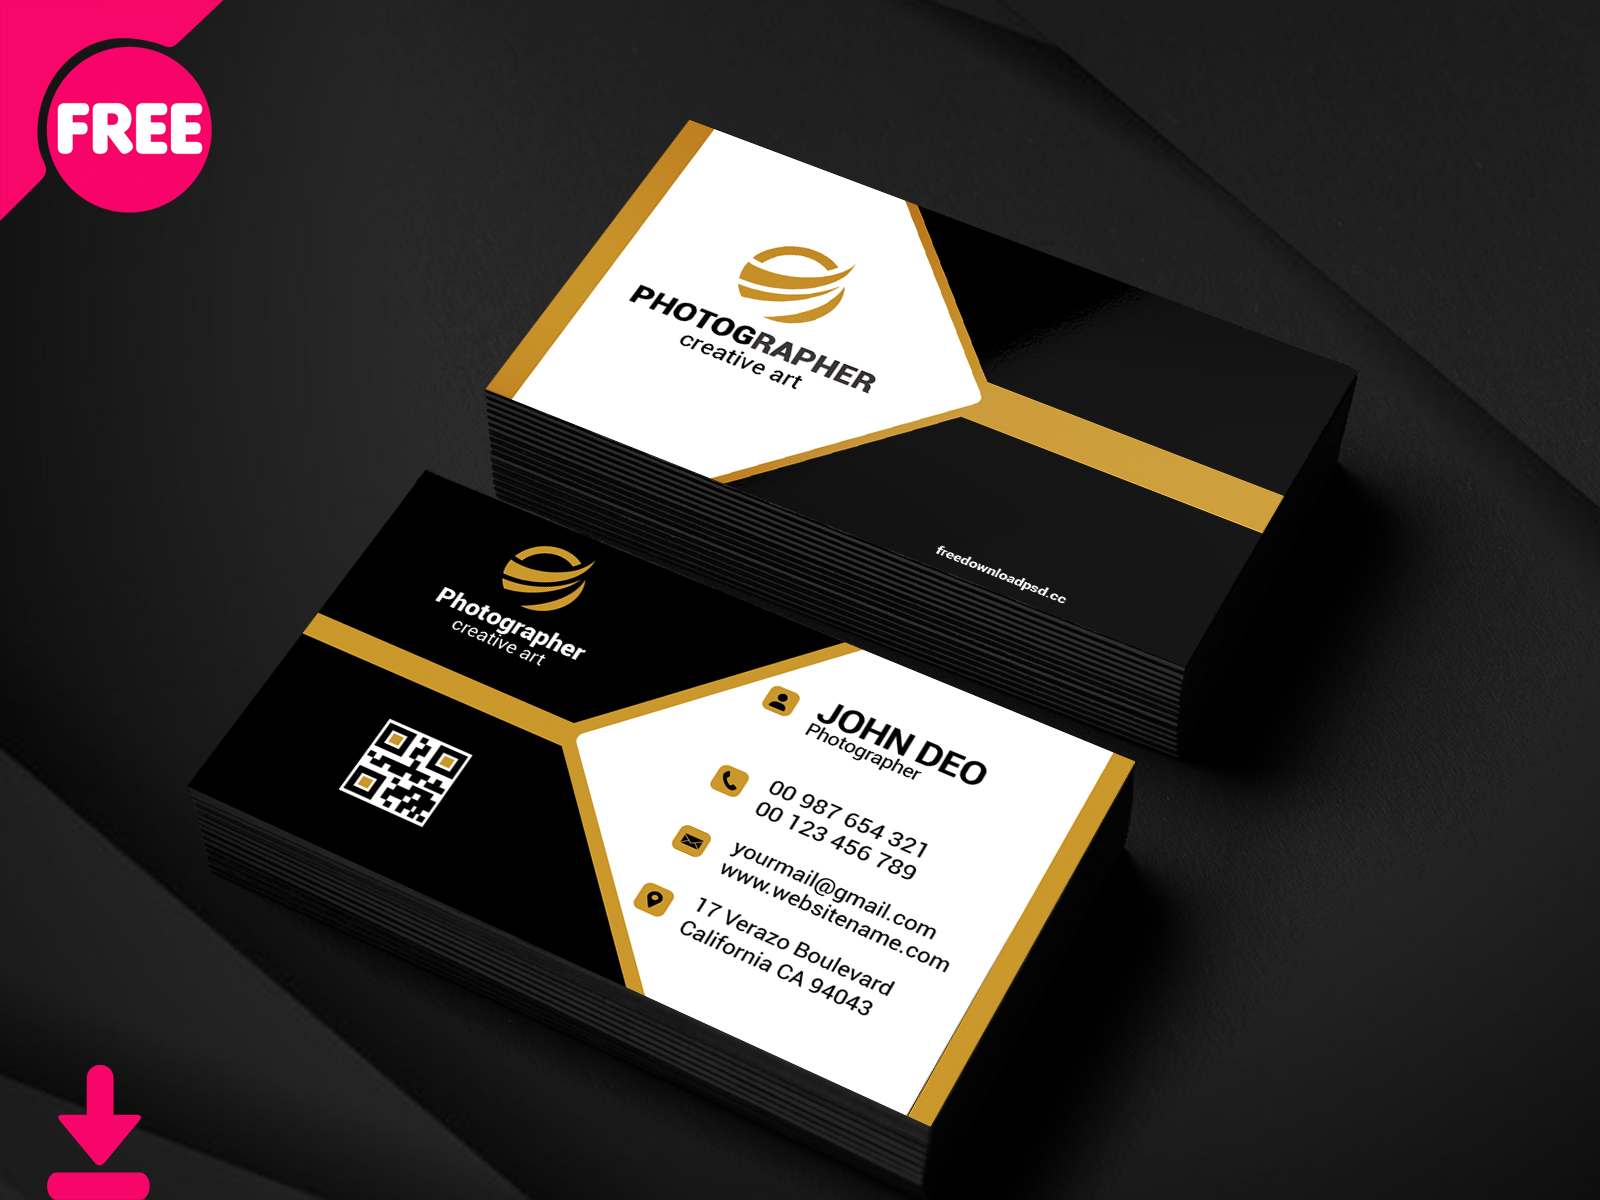 Free Sample Photography Business Card Psd Template Cover by Sheikh Within Photoshop Cs6 Business Card Template